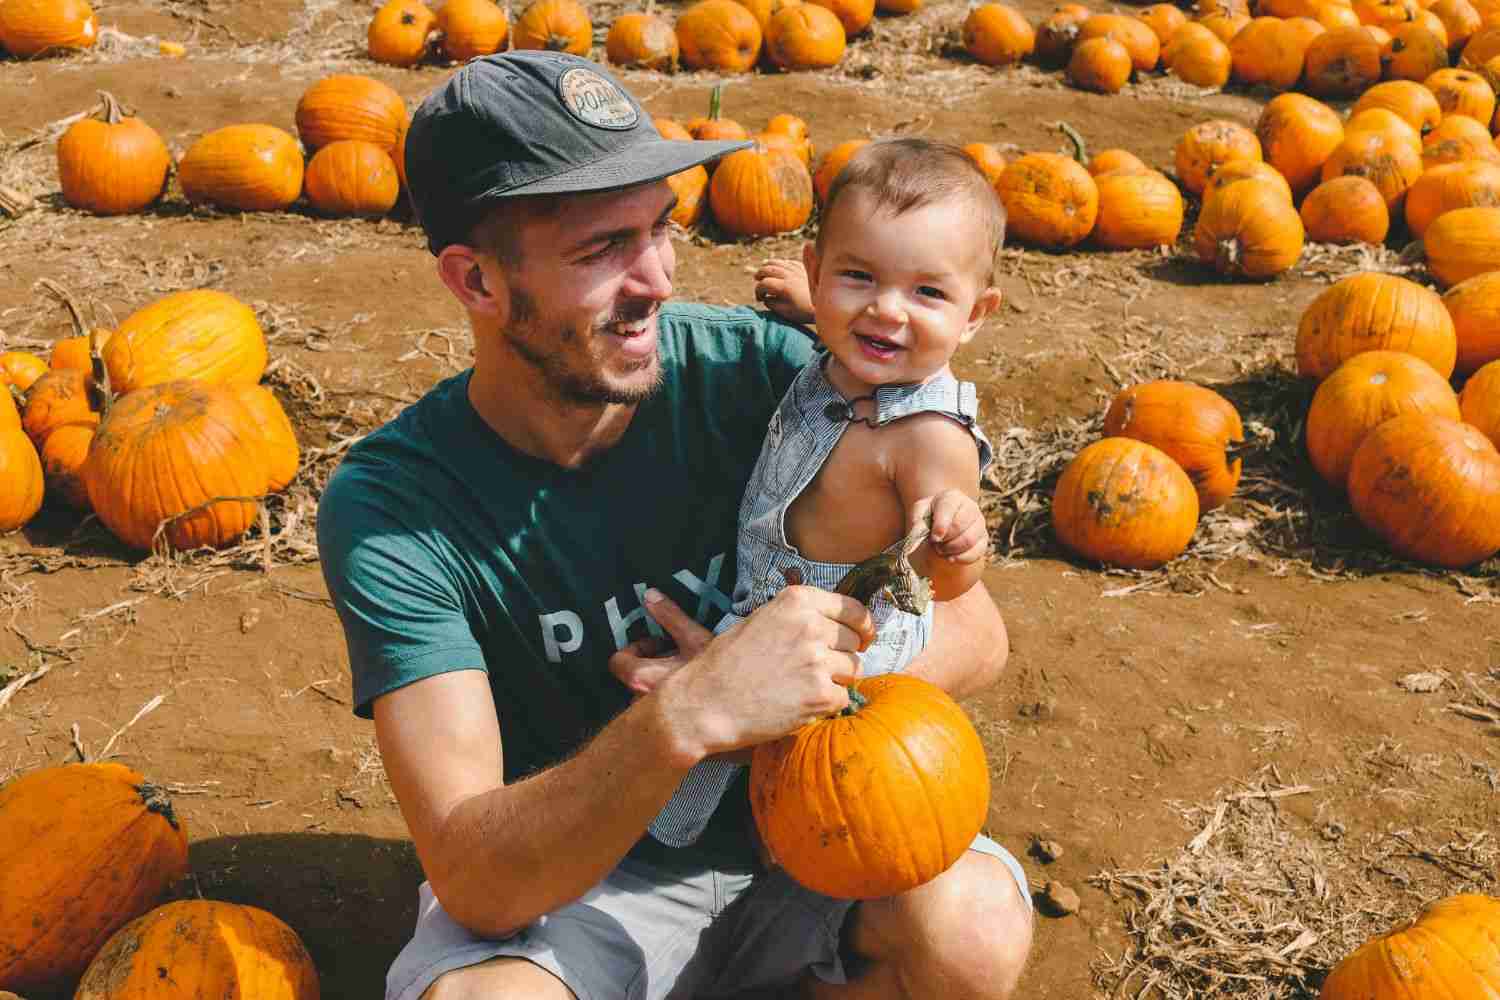 man is holding baby and pumpkin